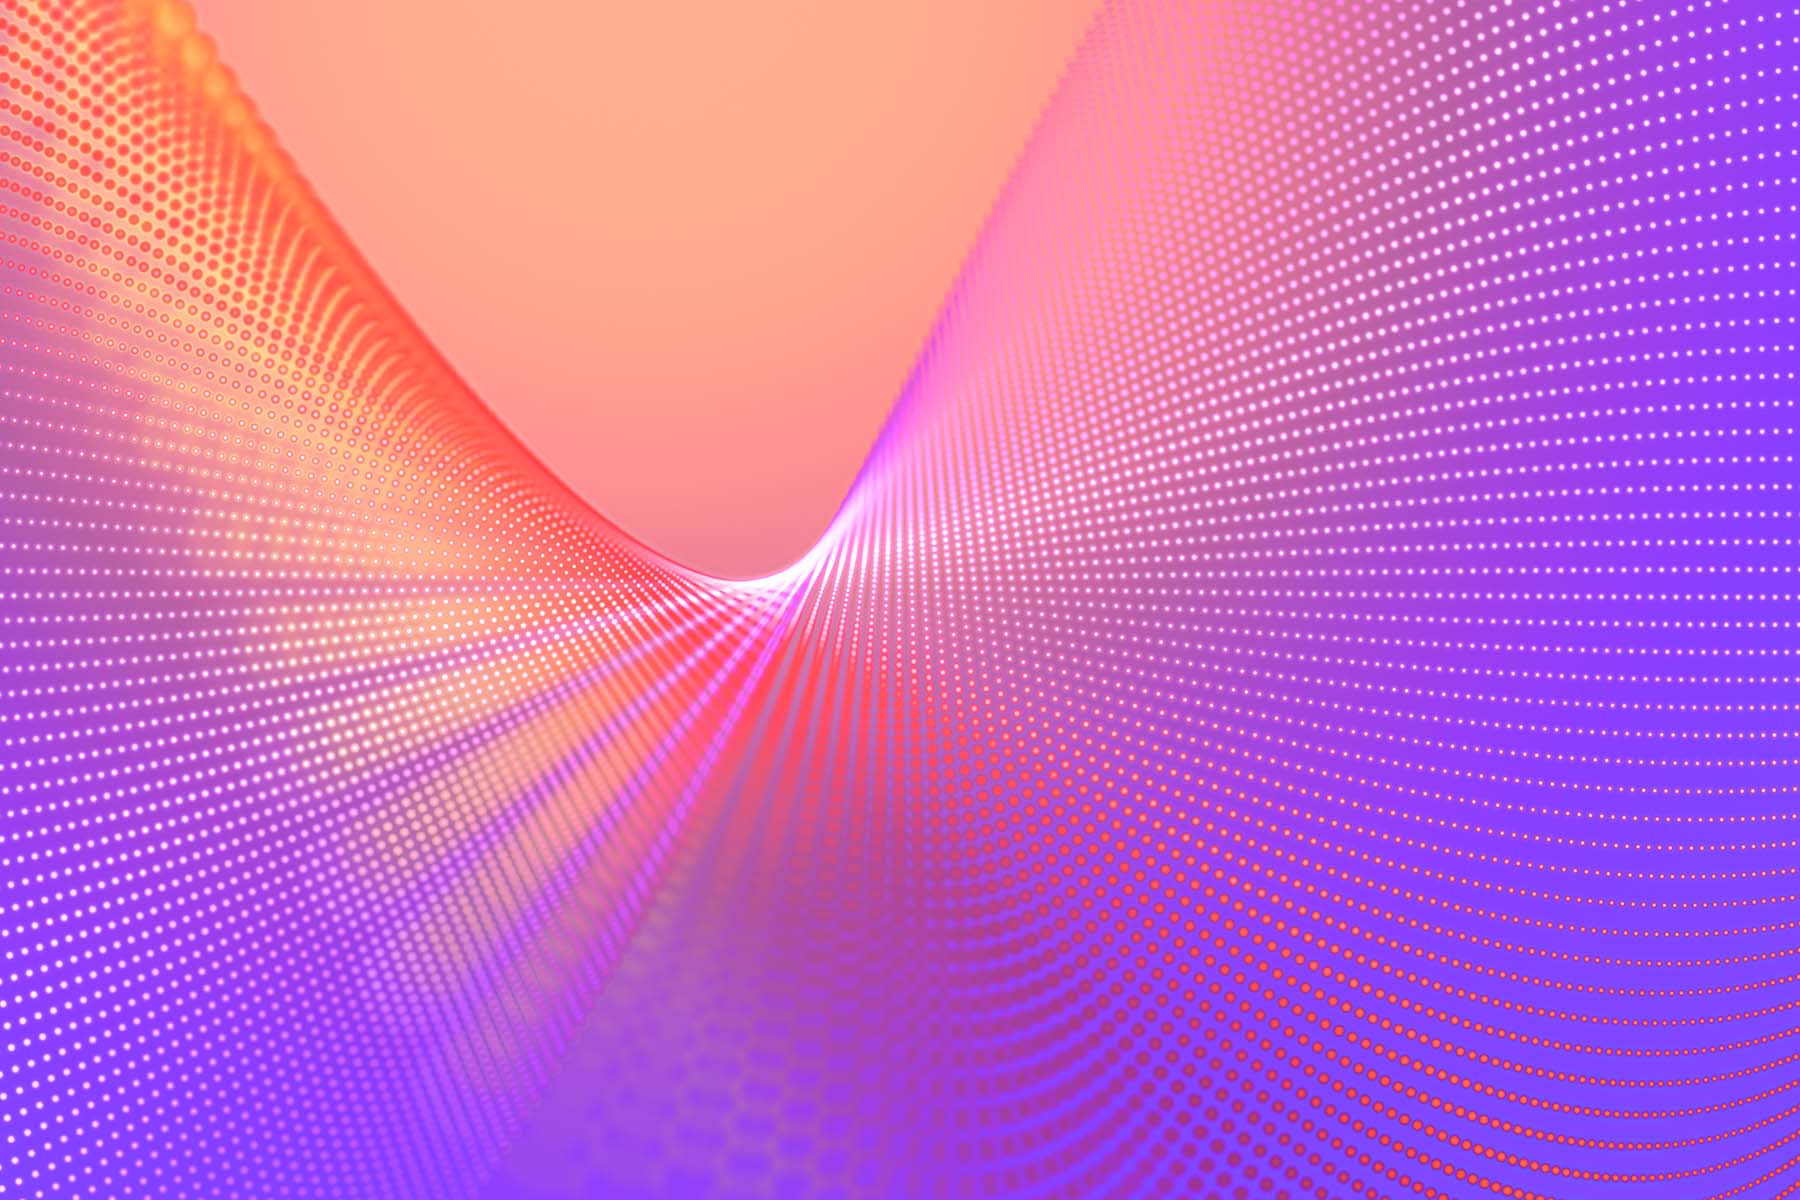 Colourful pink, orange and purple graphic 